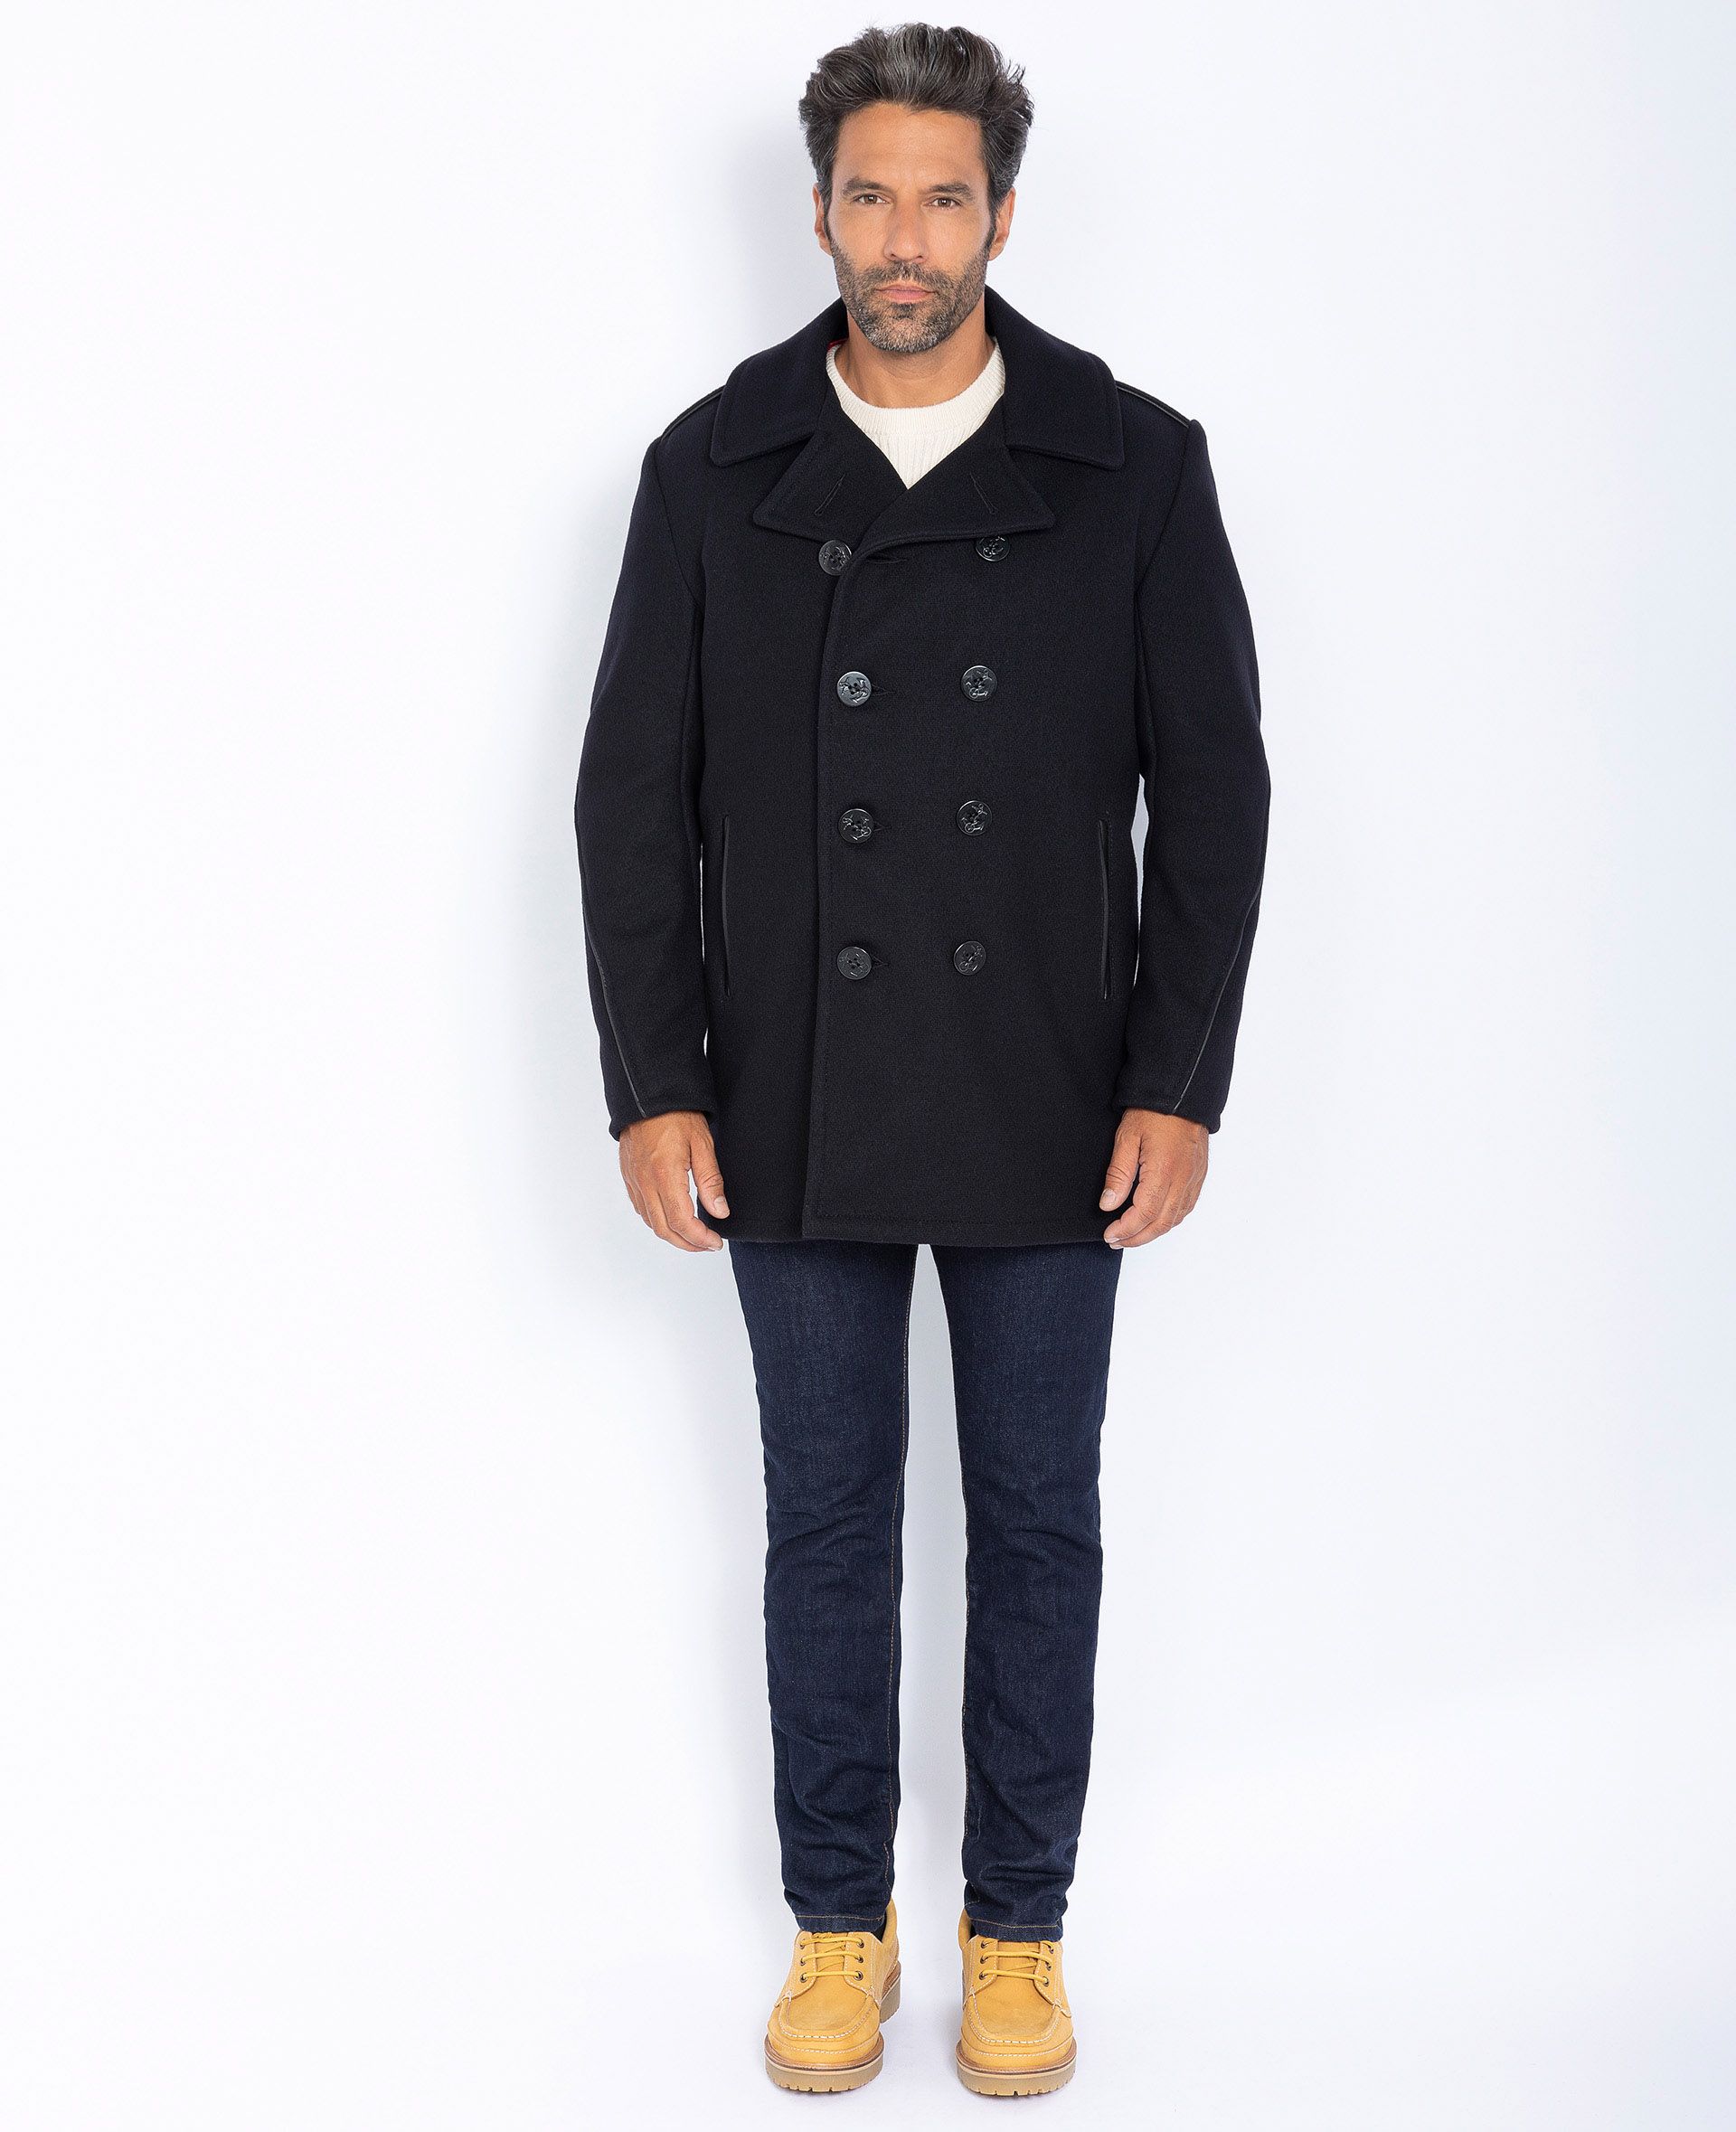 Buy Fitted peacoat, mythical USA man 75% wool / 25% nylon - Schott